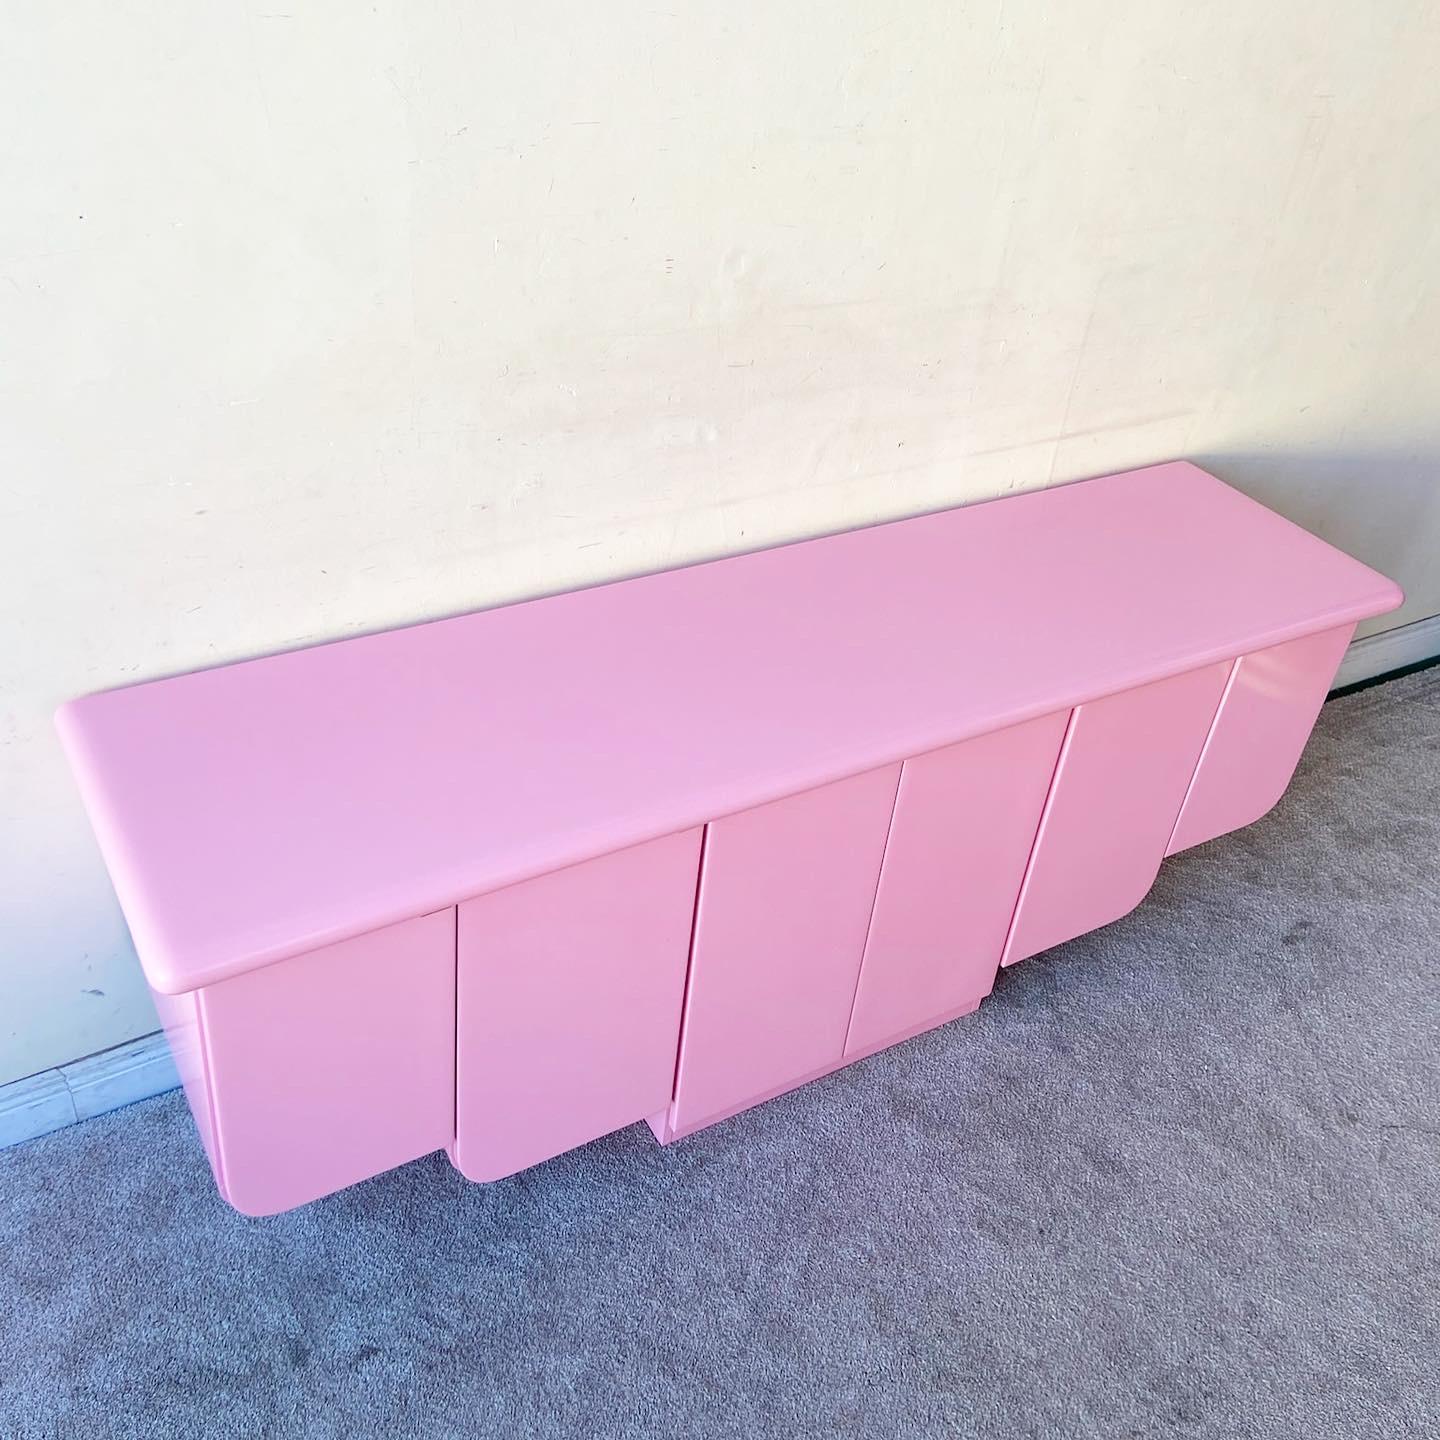 Phenomenal vintage postmodern credenza which has been refinished in a hot pink. Each door has a golden handle and opens to reveal shelved storage section ascending from the center.